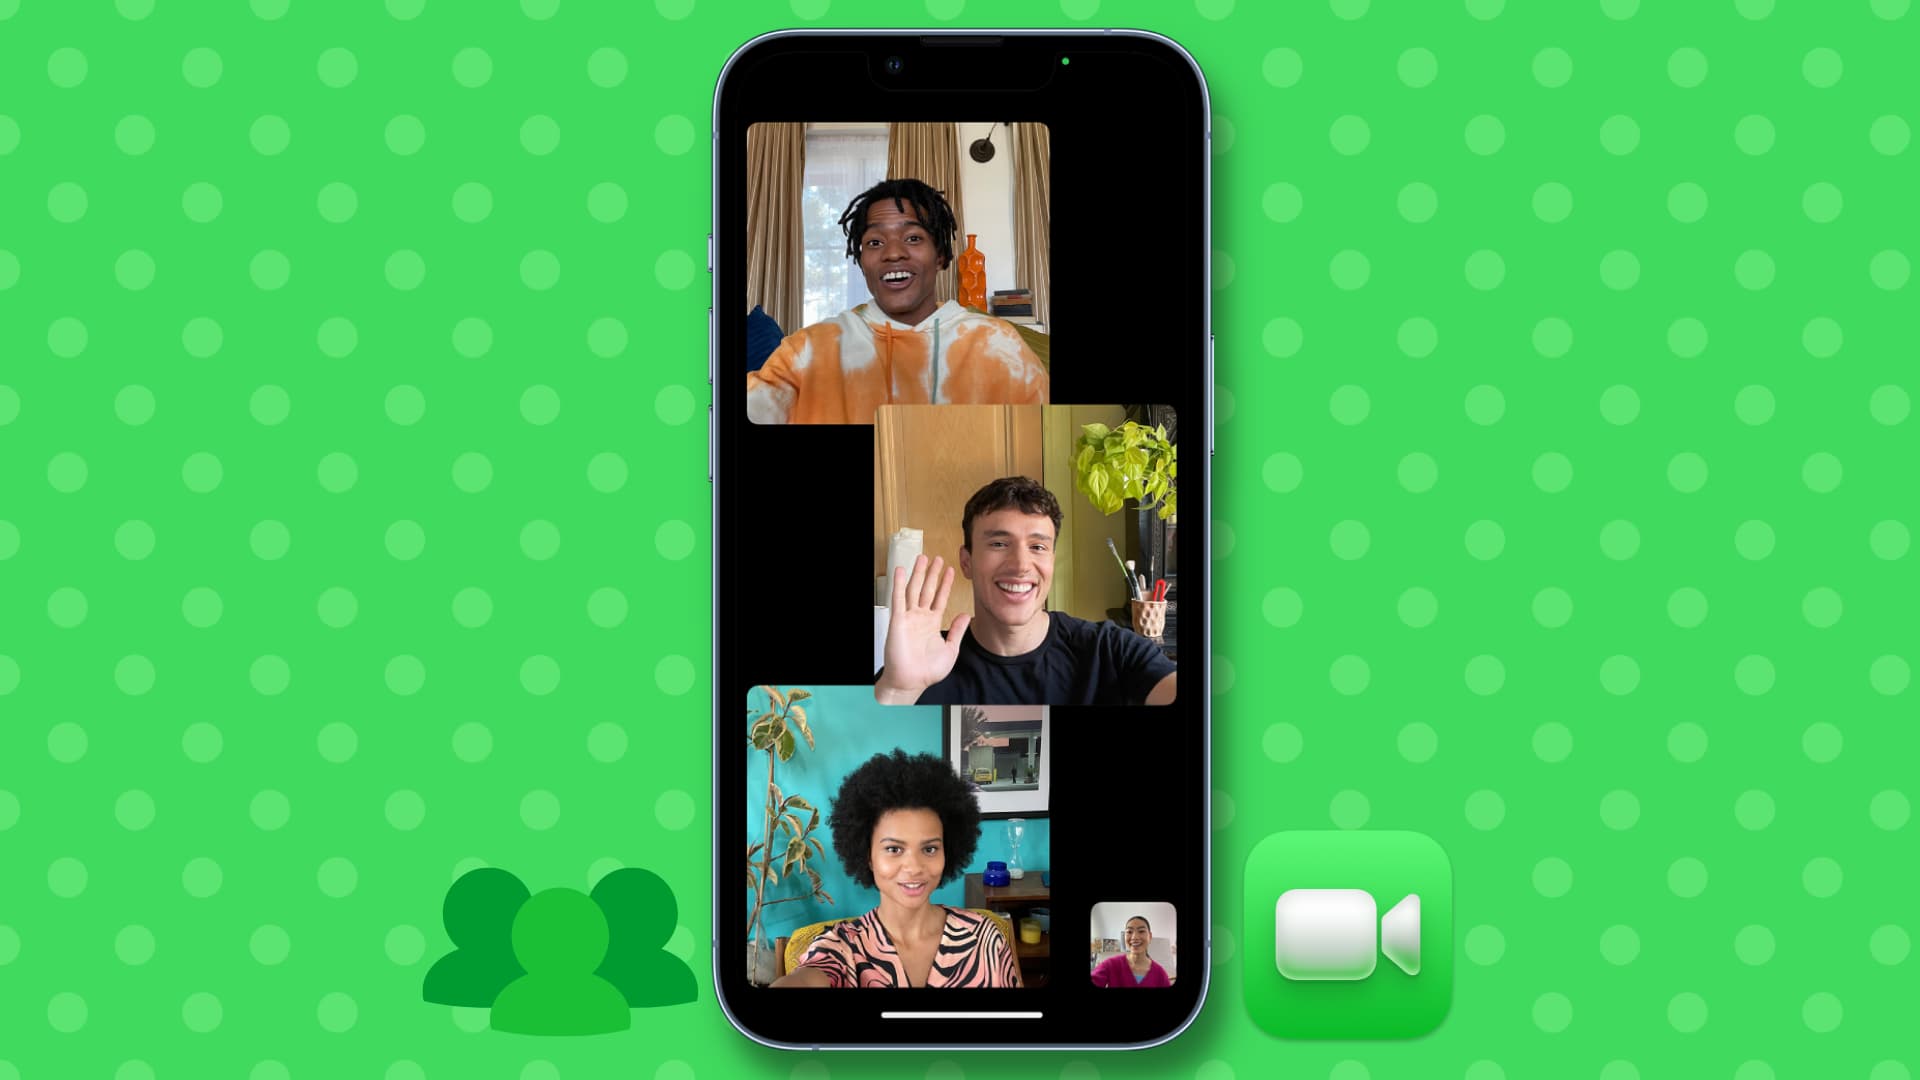 Ongoing Group FaceTime call on iPhone